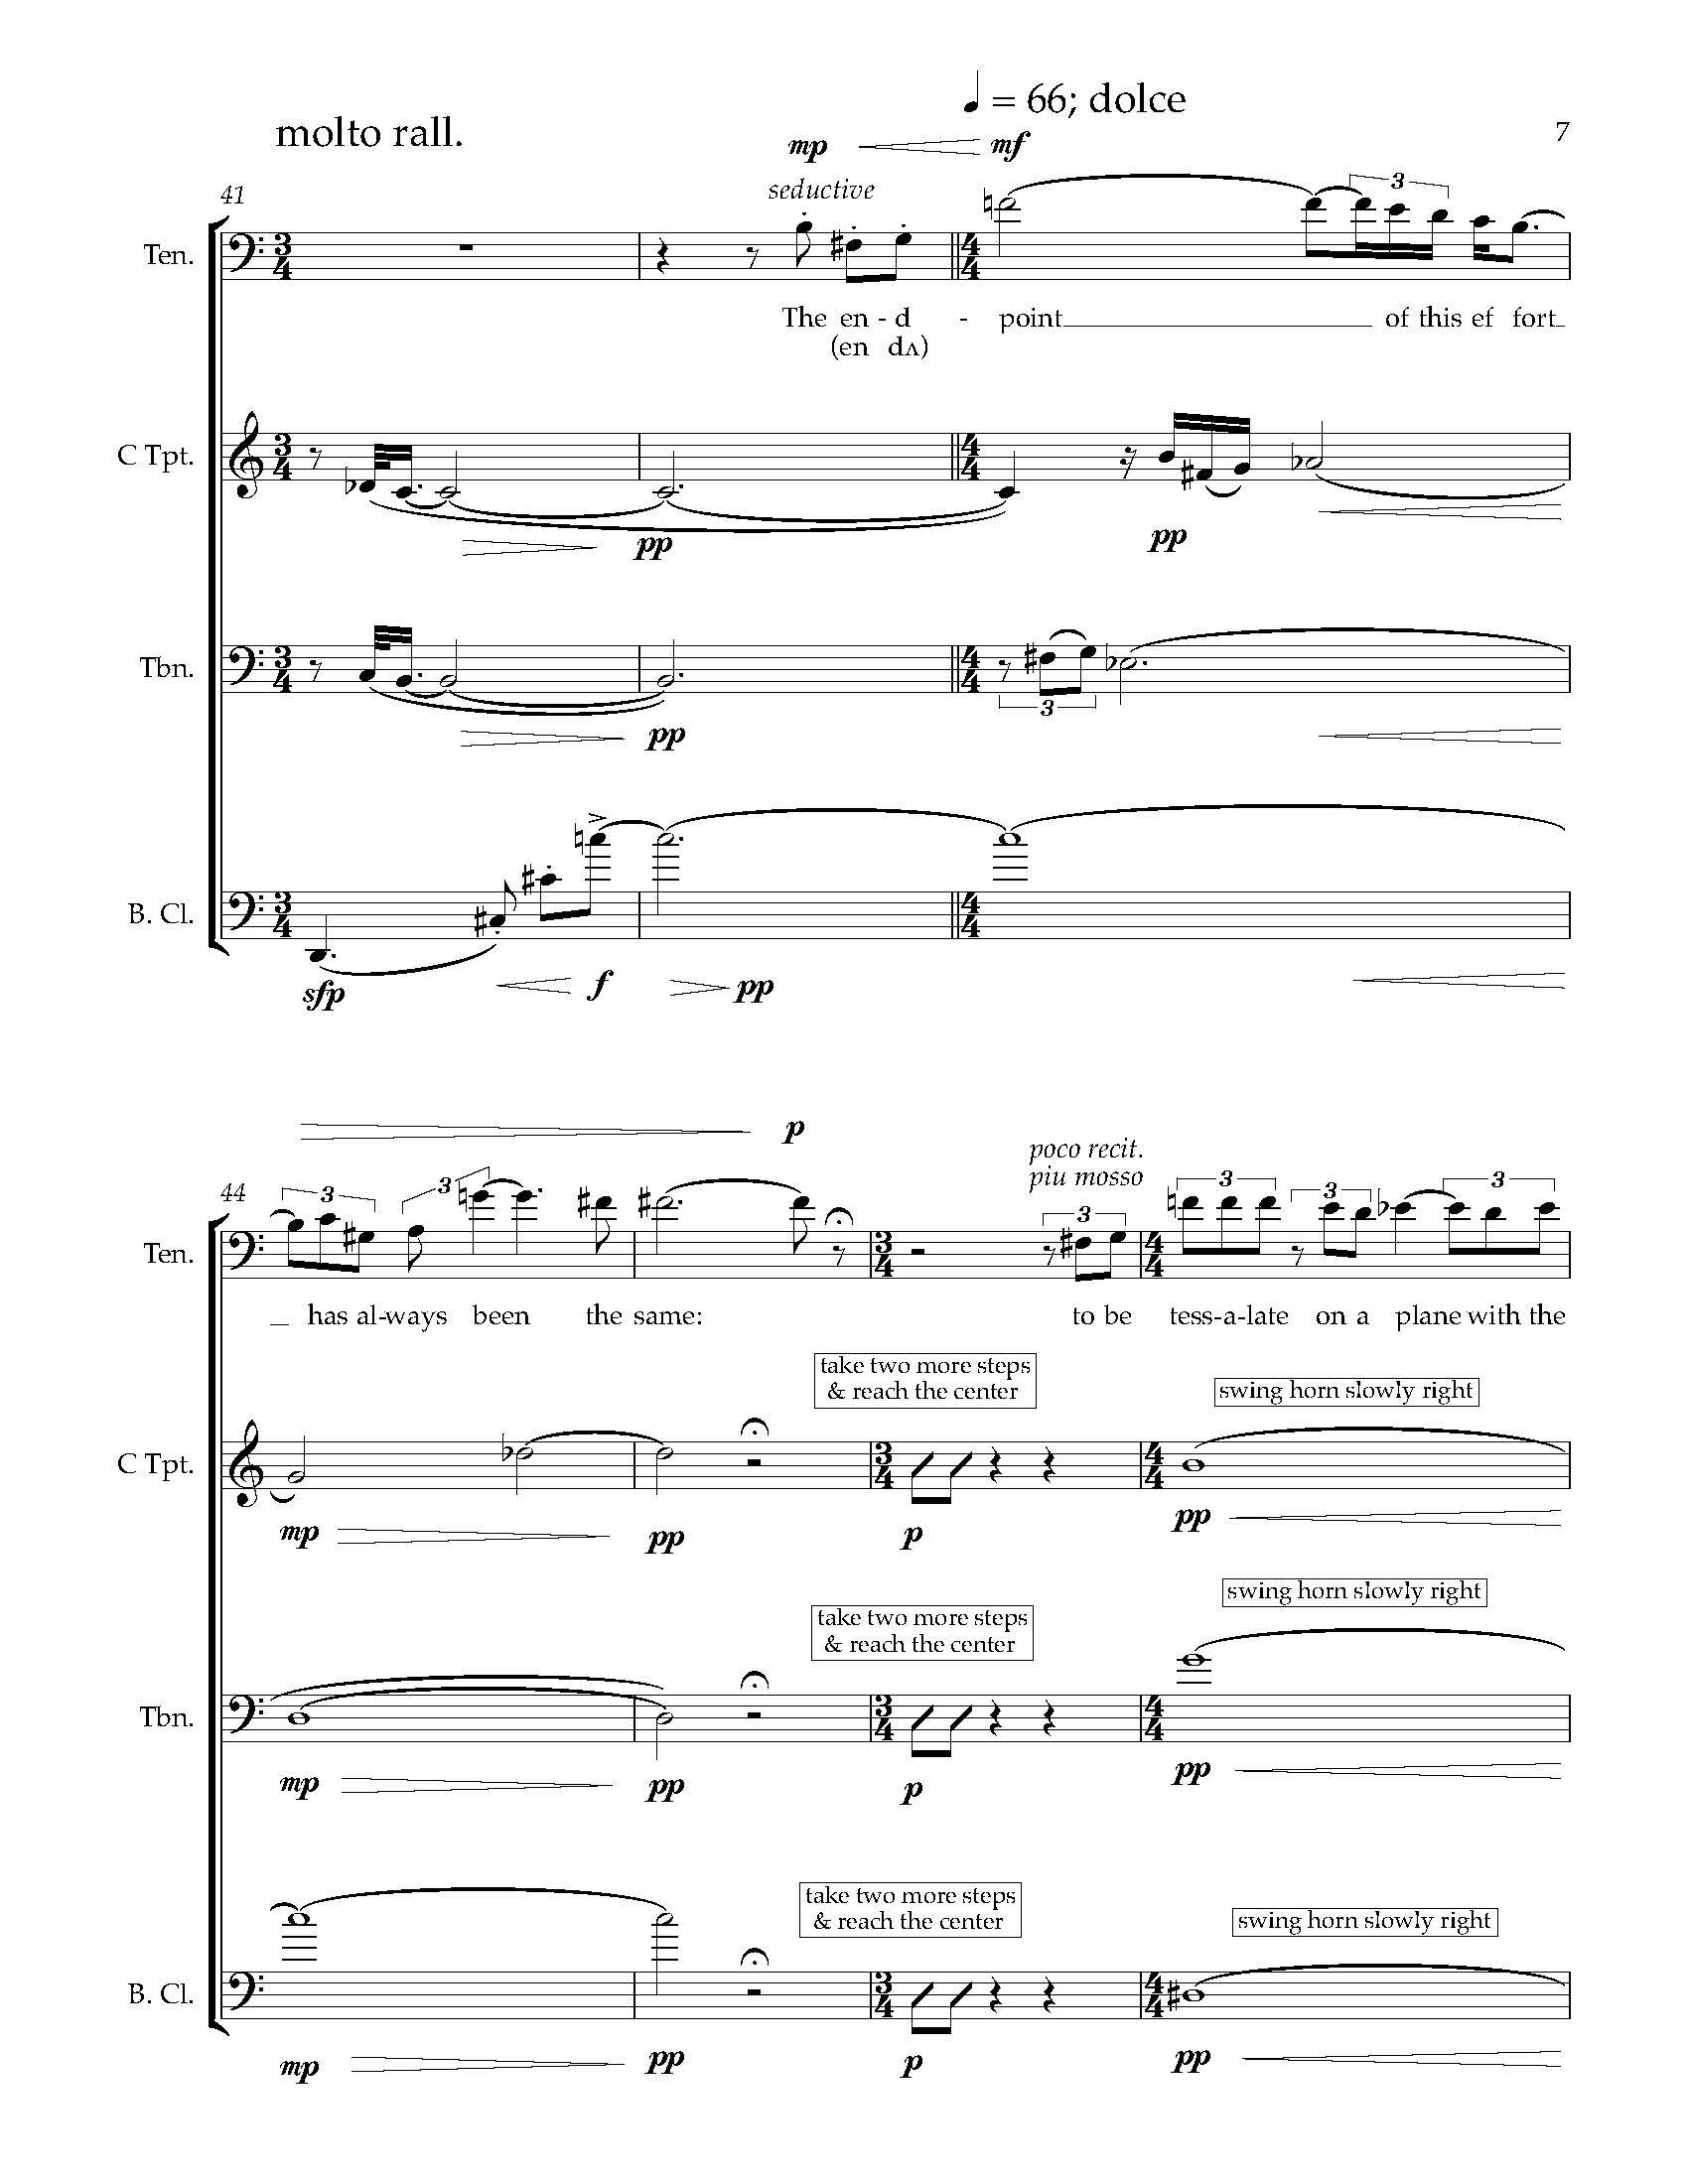 Many Worlds [1] - Complete Score_Page_16.jpg